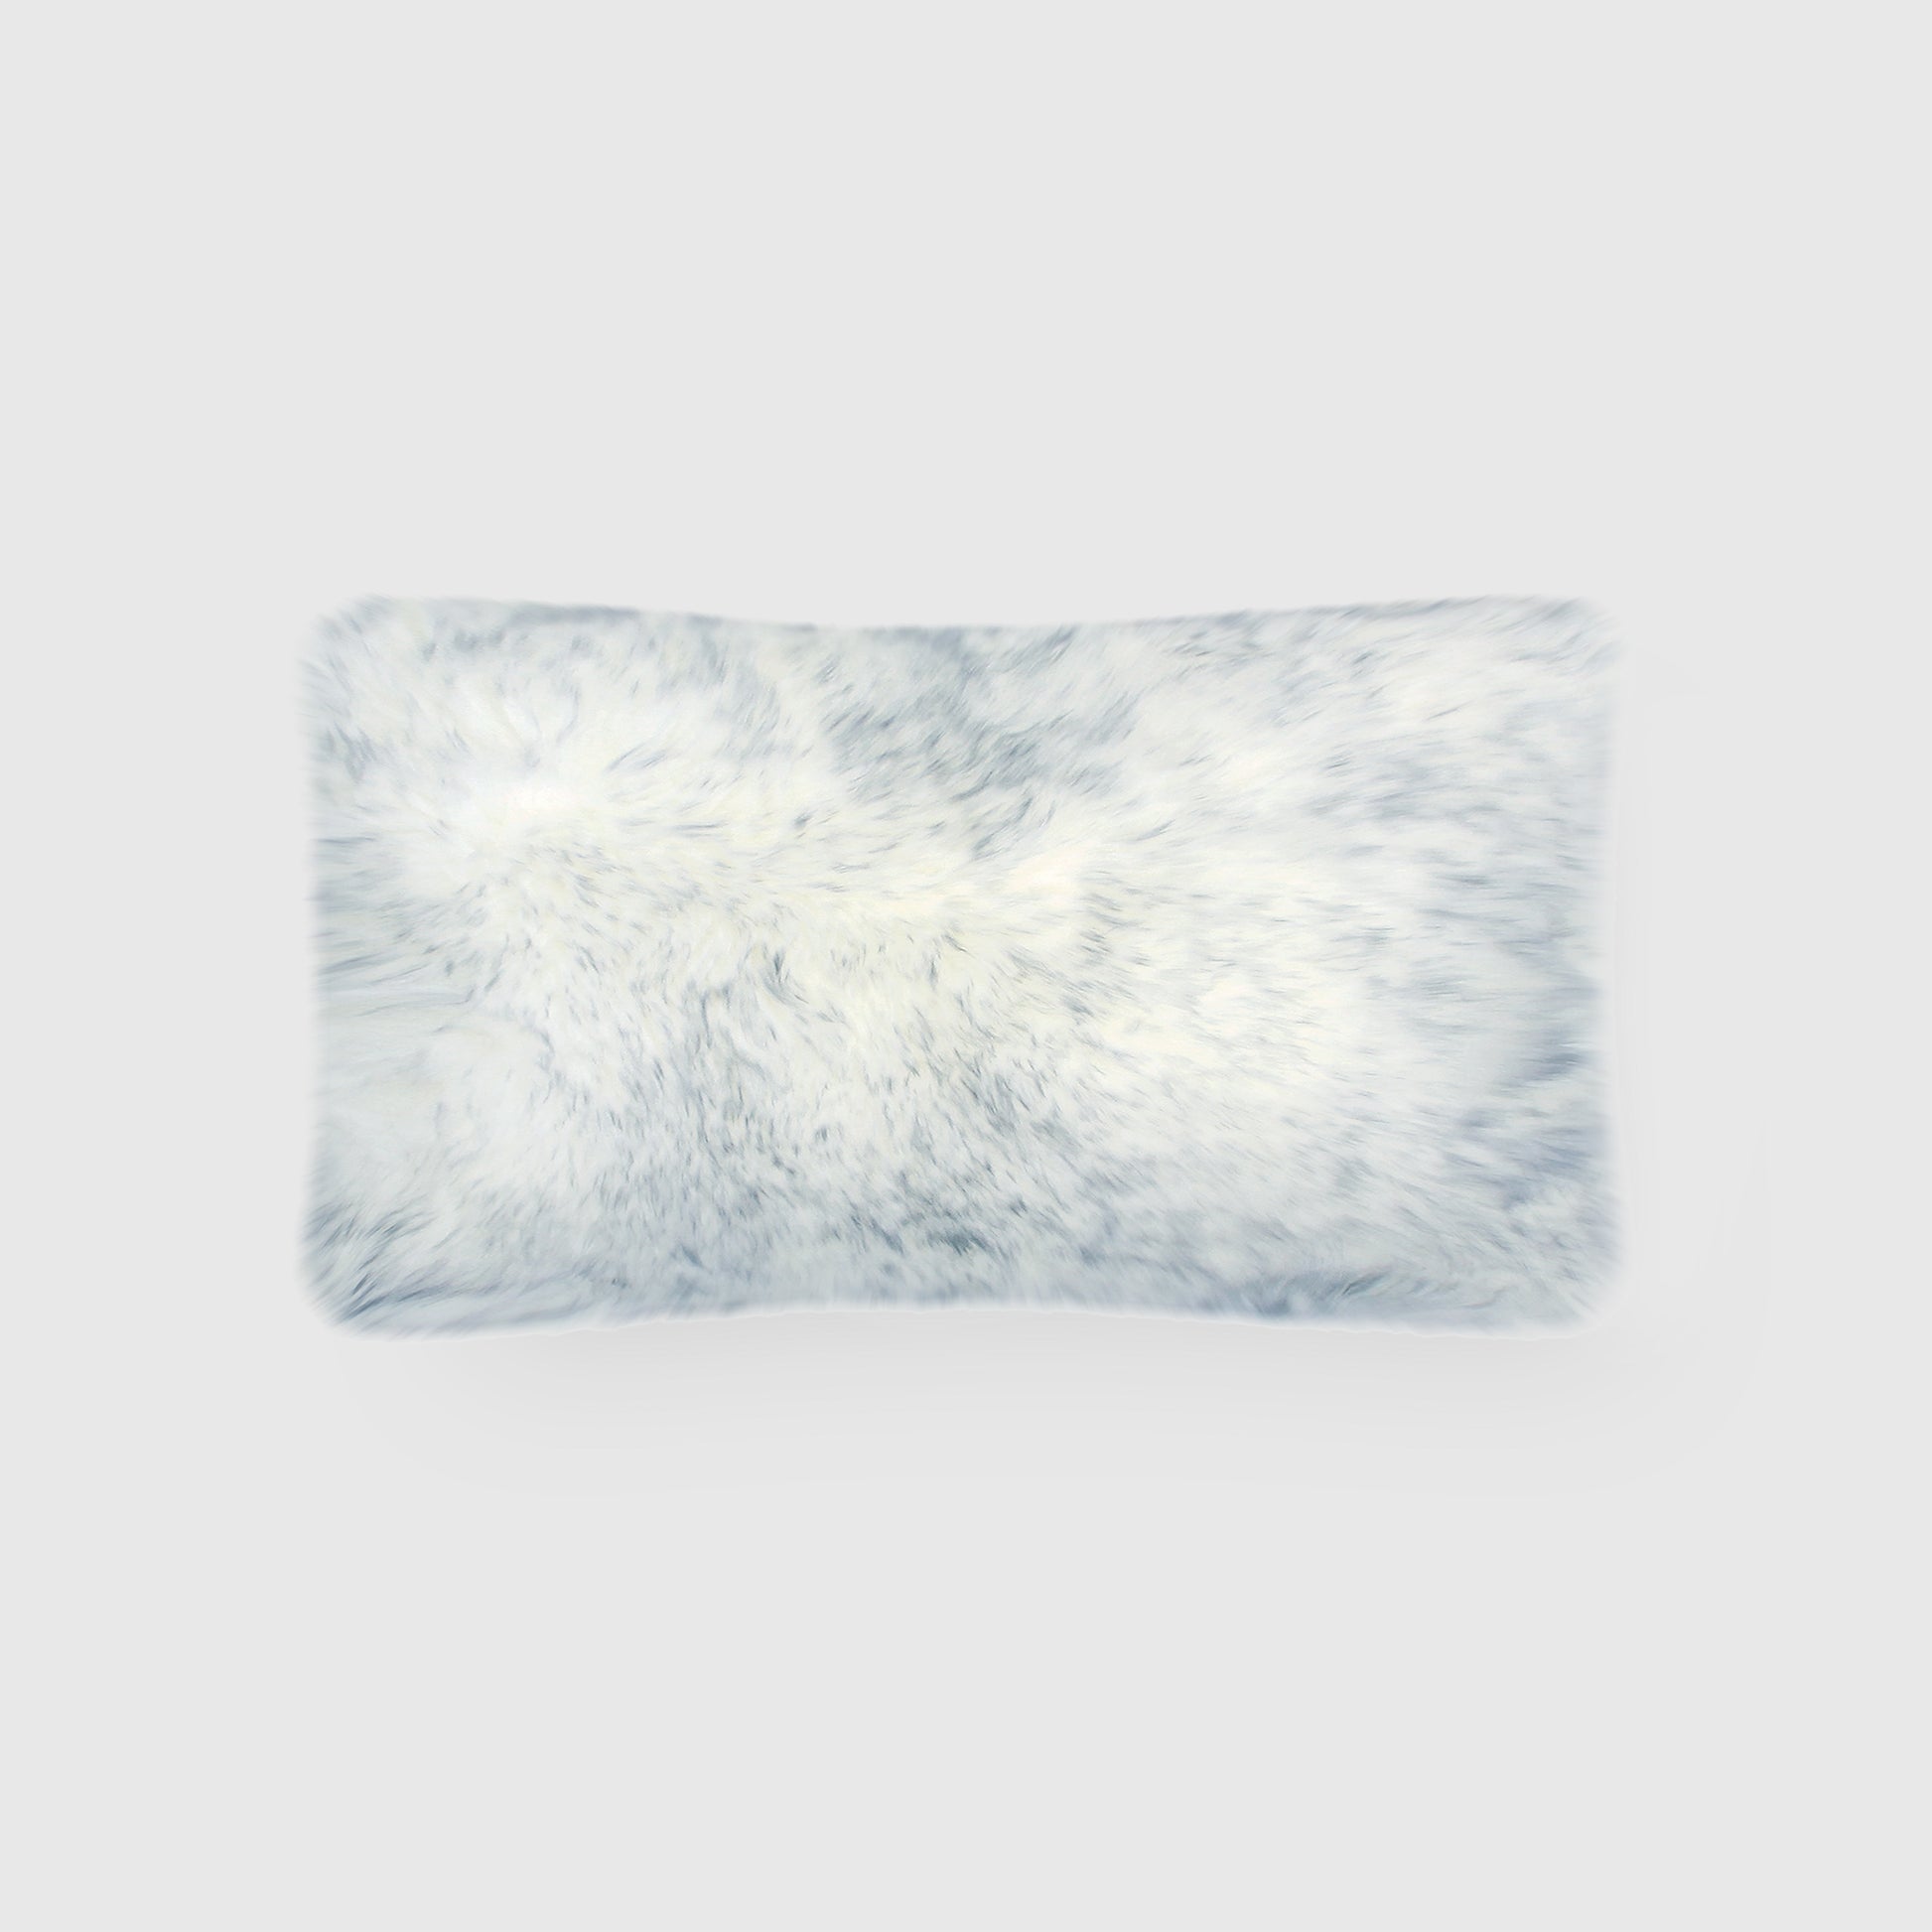 The Mood | Charlie Sheepskin Double-sided 12"x22" Pillow, Gray Mist